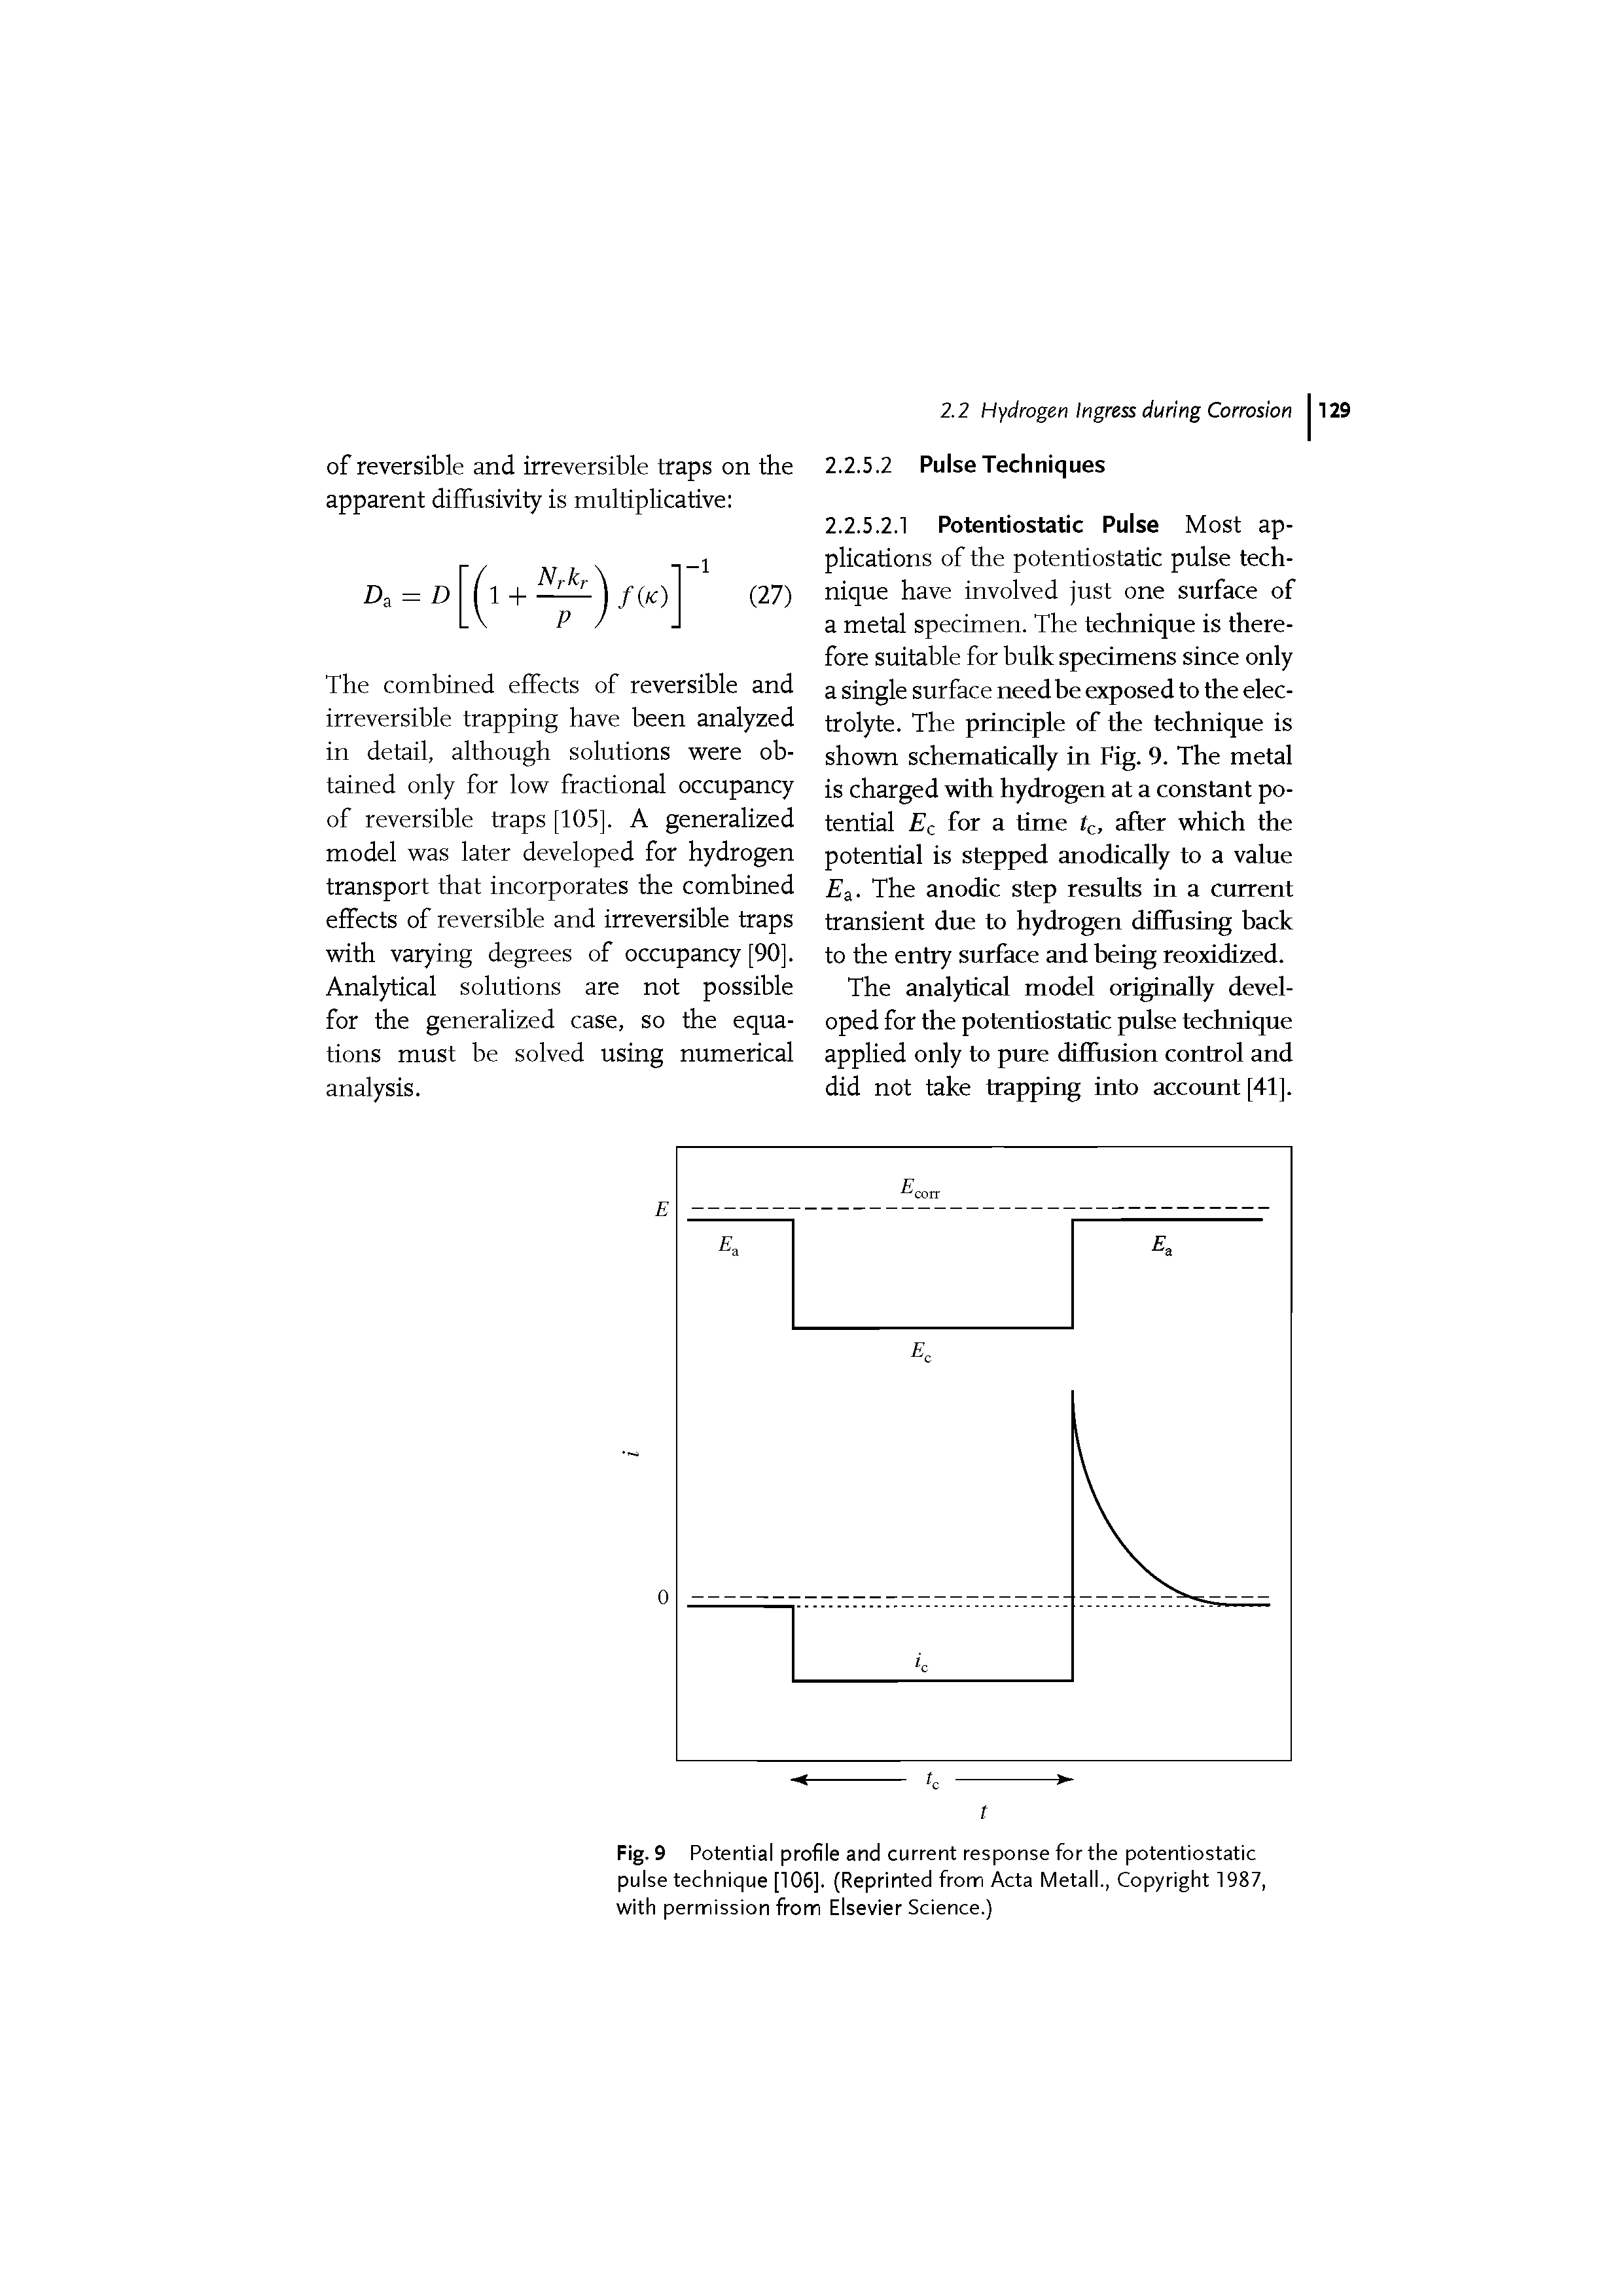 Fig. 9 Potential profile and current response for the potentiostatic pulse technique [106]. (Reprinted from Acta Metall., Copyright 1987, with permission from Elsevier Science.)...